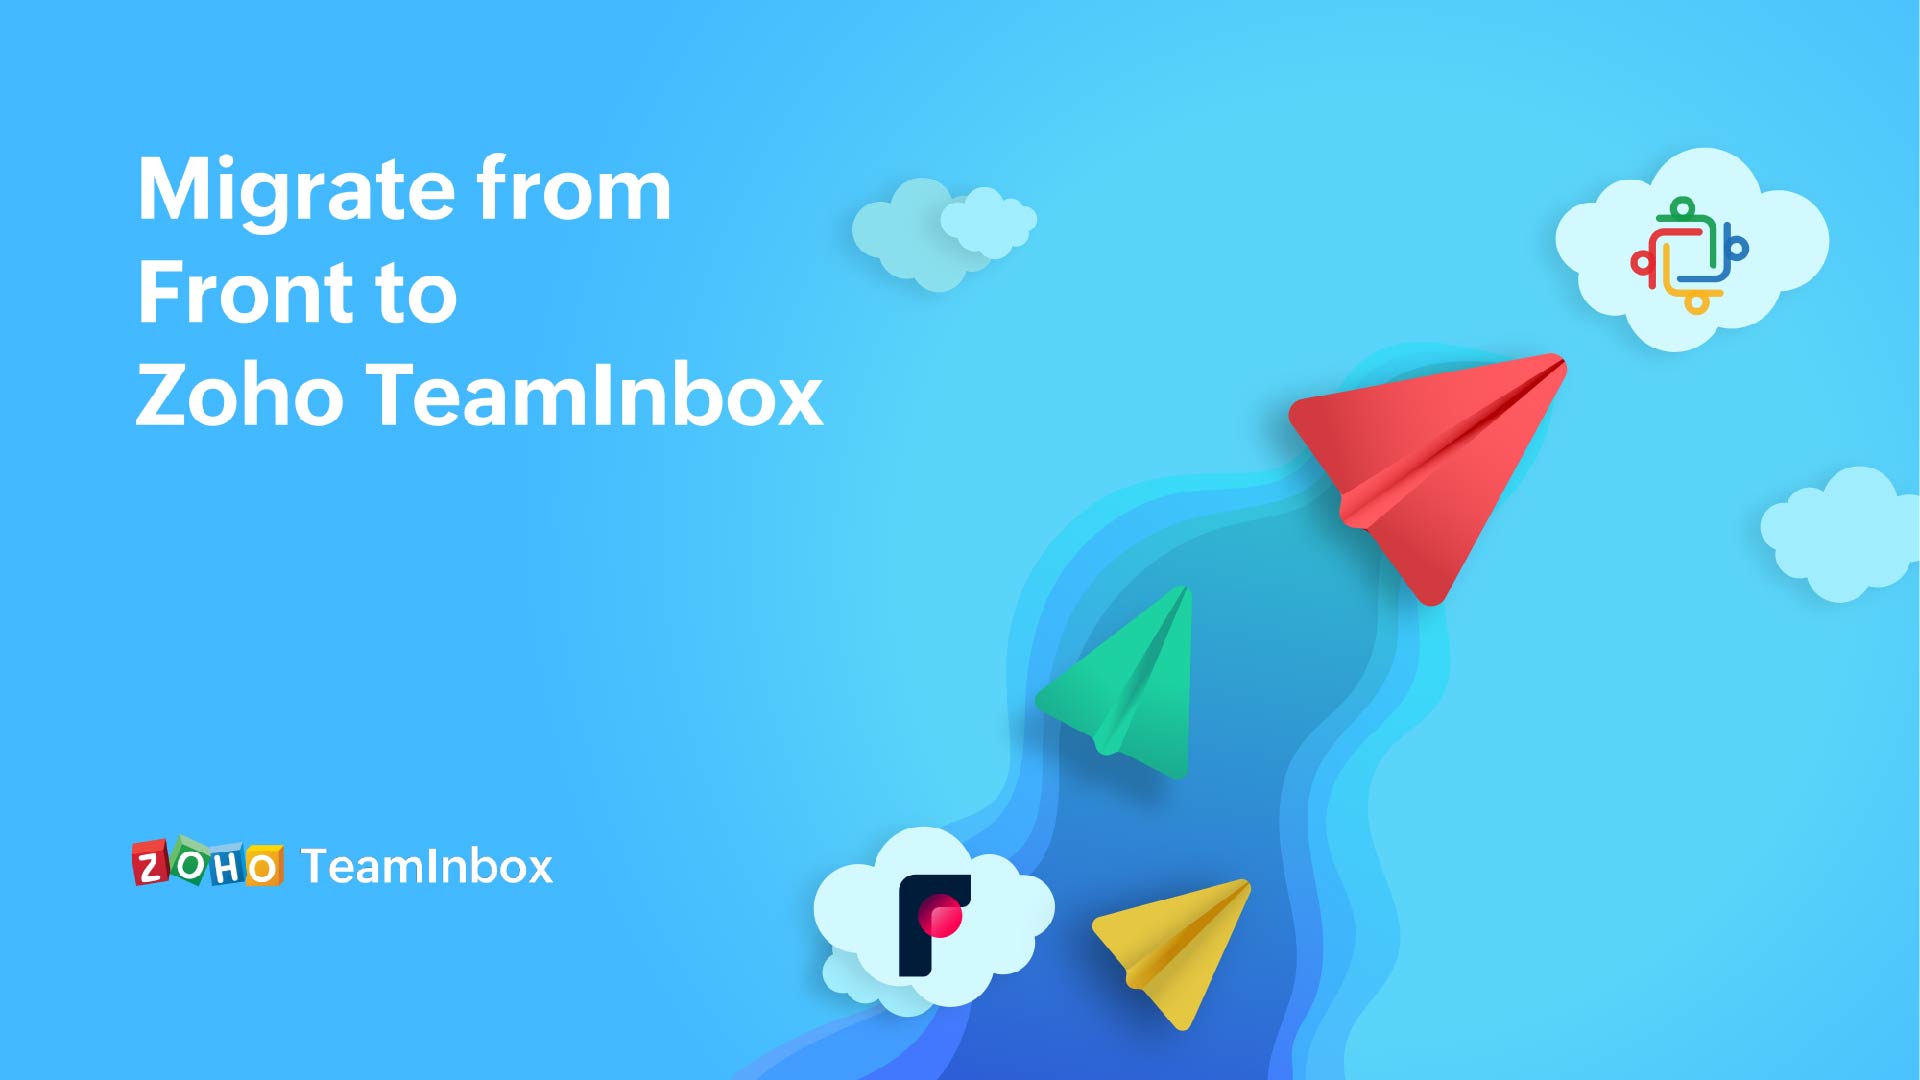 Zoho TeamInbox - a compelling alternative to Front